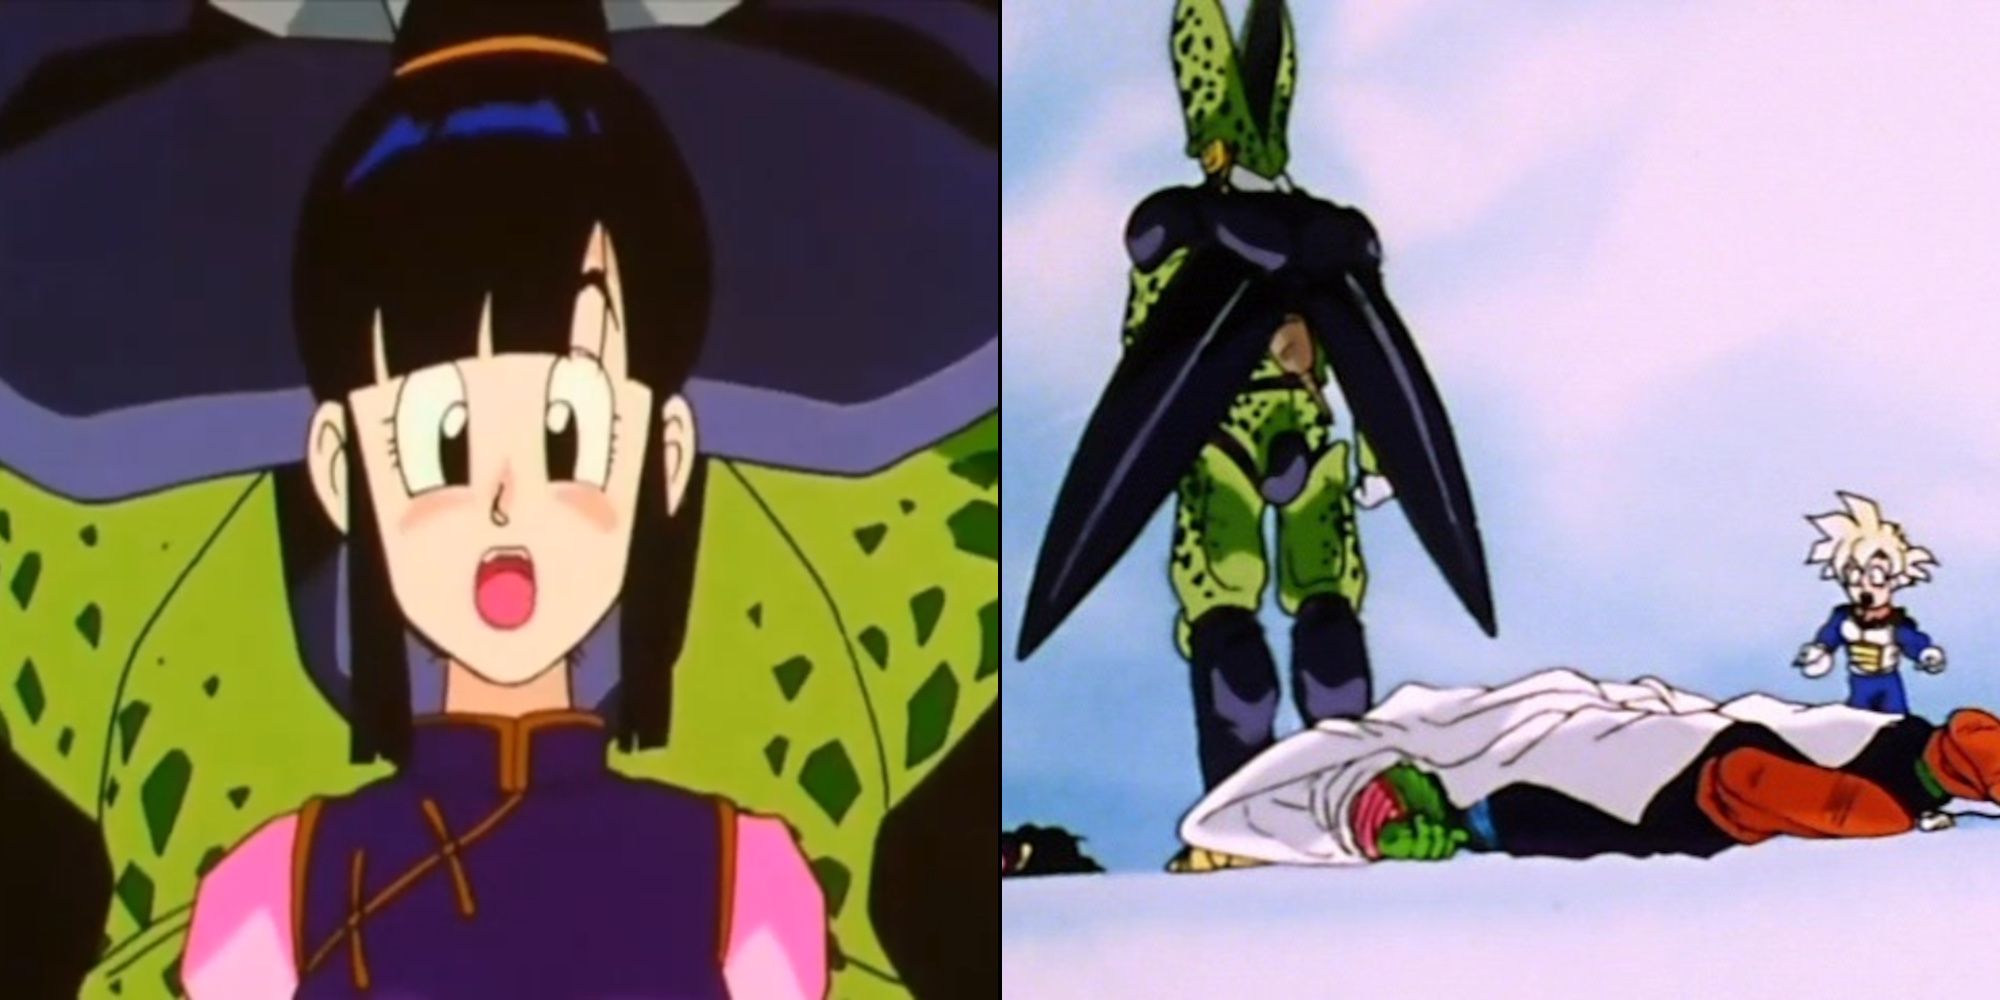 Cell and Chi Chi, Gohan's Nightmare